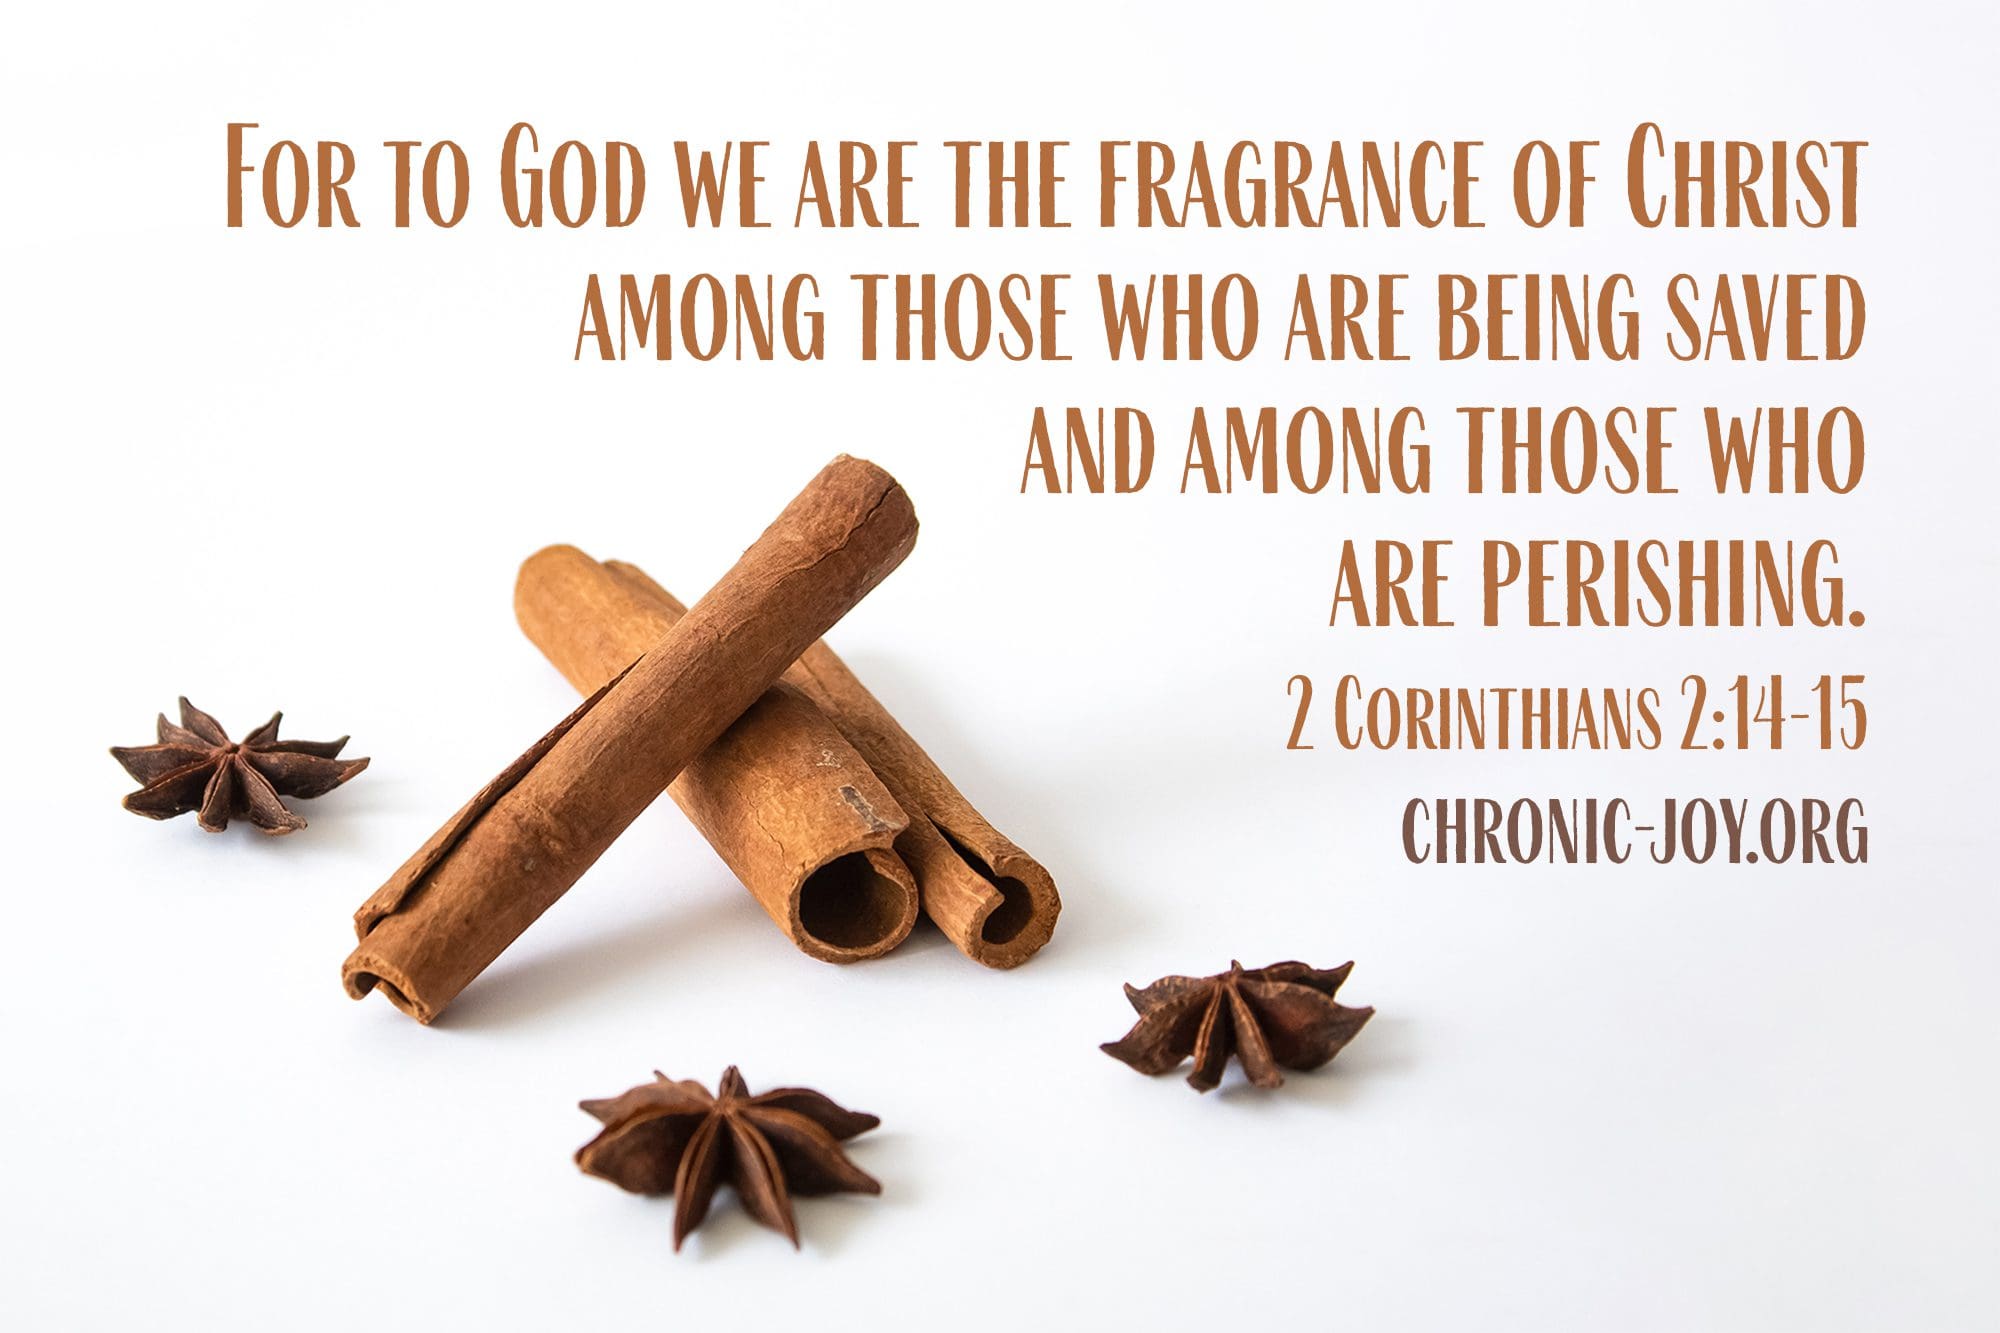 "For to God we are the fragrance of Christ among those who are being saved and among those who are perishing." 2 Corinthians 2:14-15